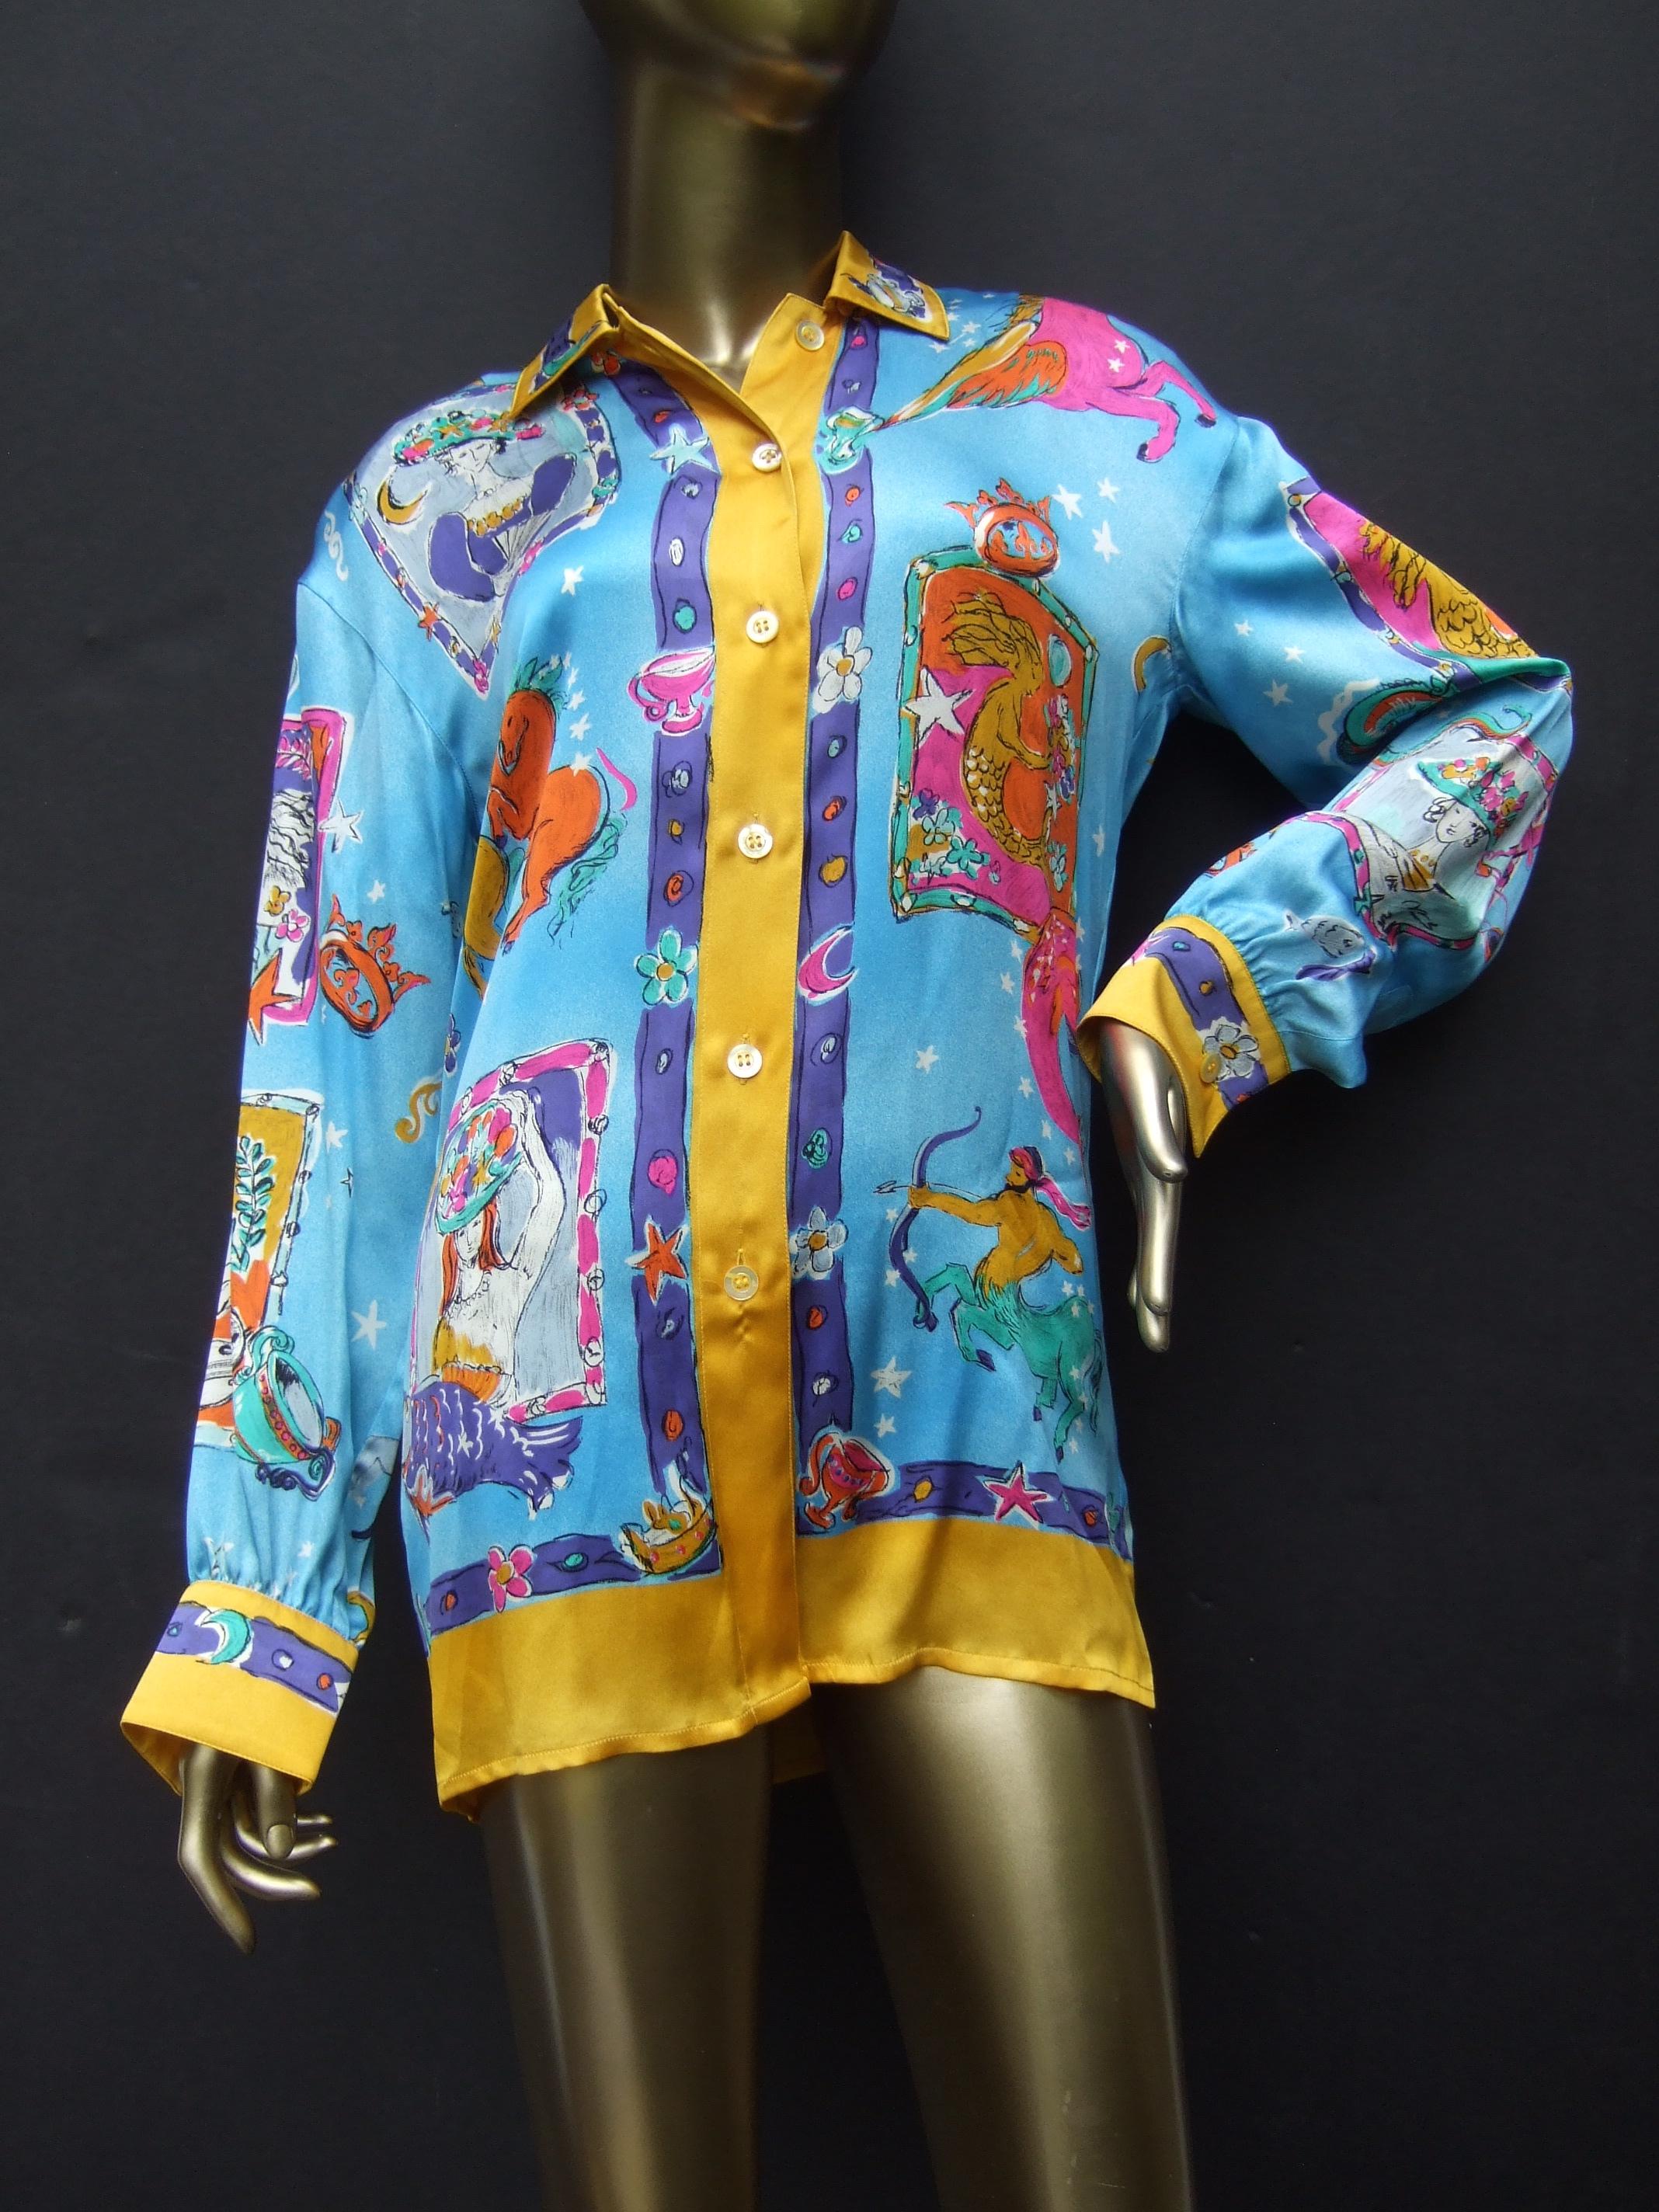 Escada Silk charmeuse astrological zodiac graphic print blouse. New-Vintage Size 34
The stylish silk blouse is illustrated with a collage of vibrant graphic designs; illuminated against a turquoise aqua-blue background that represents the sky with